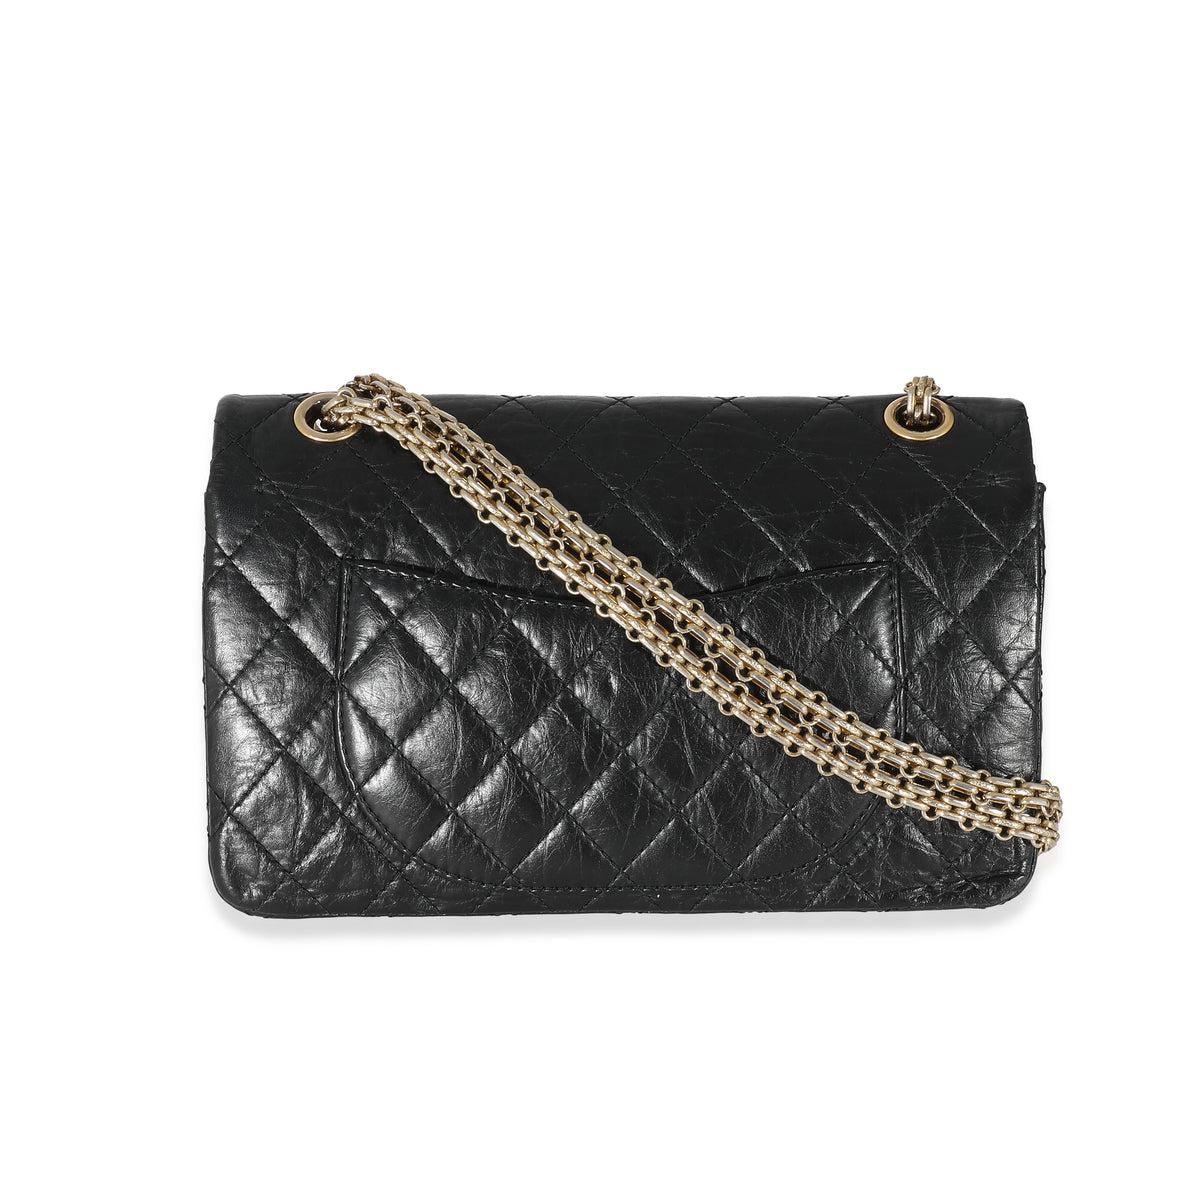 Chanel Black Aged Calfskin Quilted 2.55 Reissue 225 Flap Bag